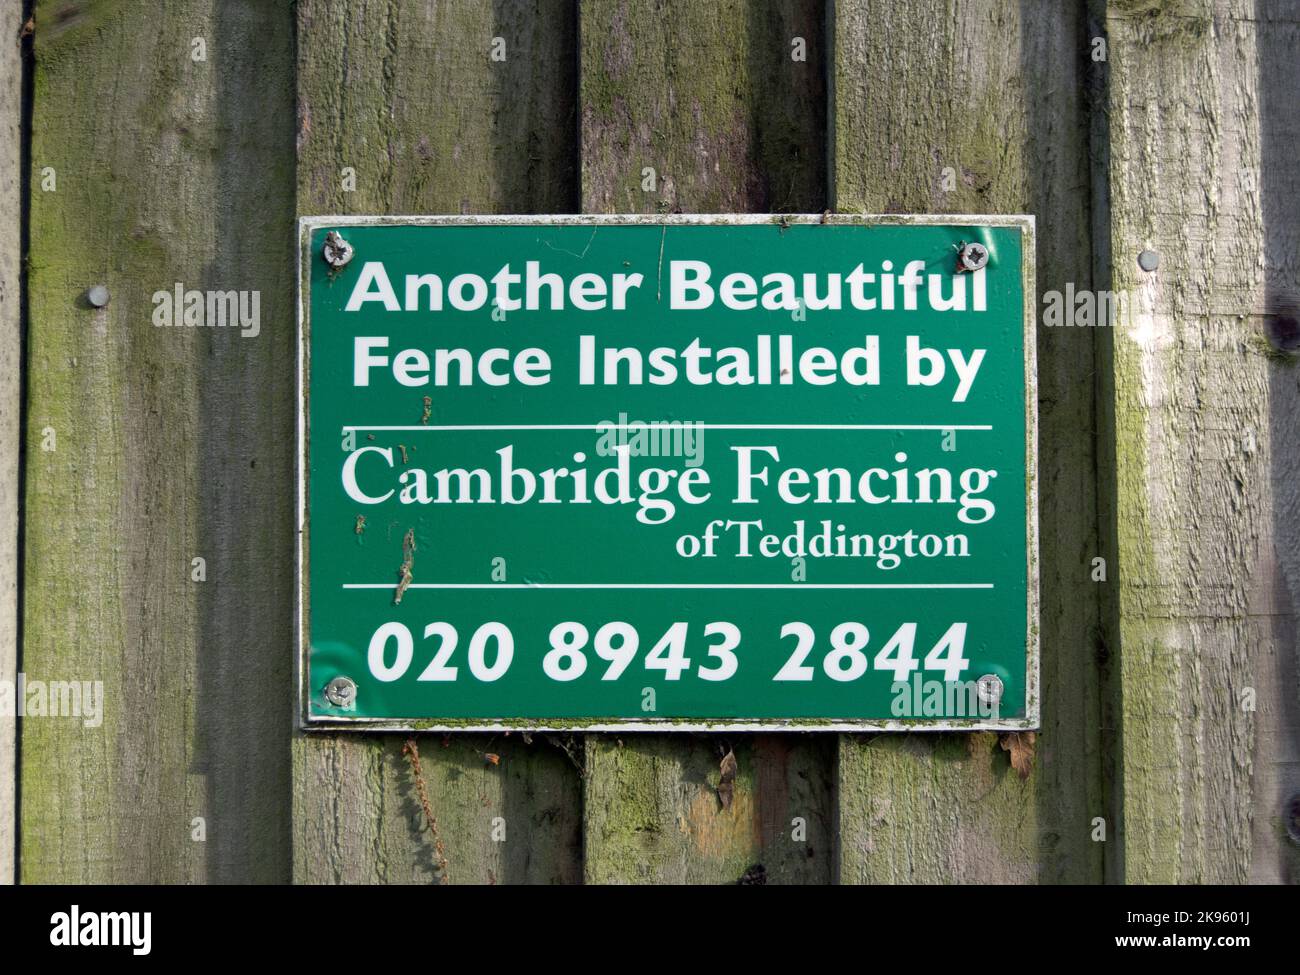 on a wooden garden fence in kingston, surrey, england, the installers leave a sign claiming to have provided another beautiful fence Stock Photo